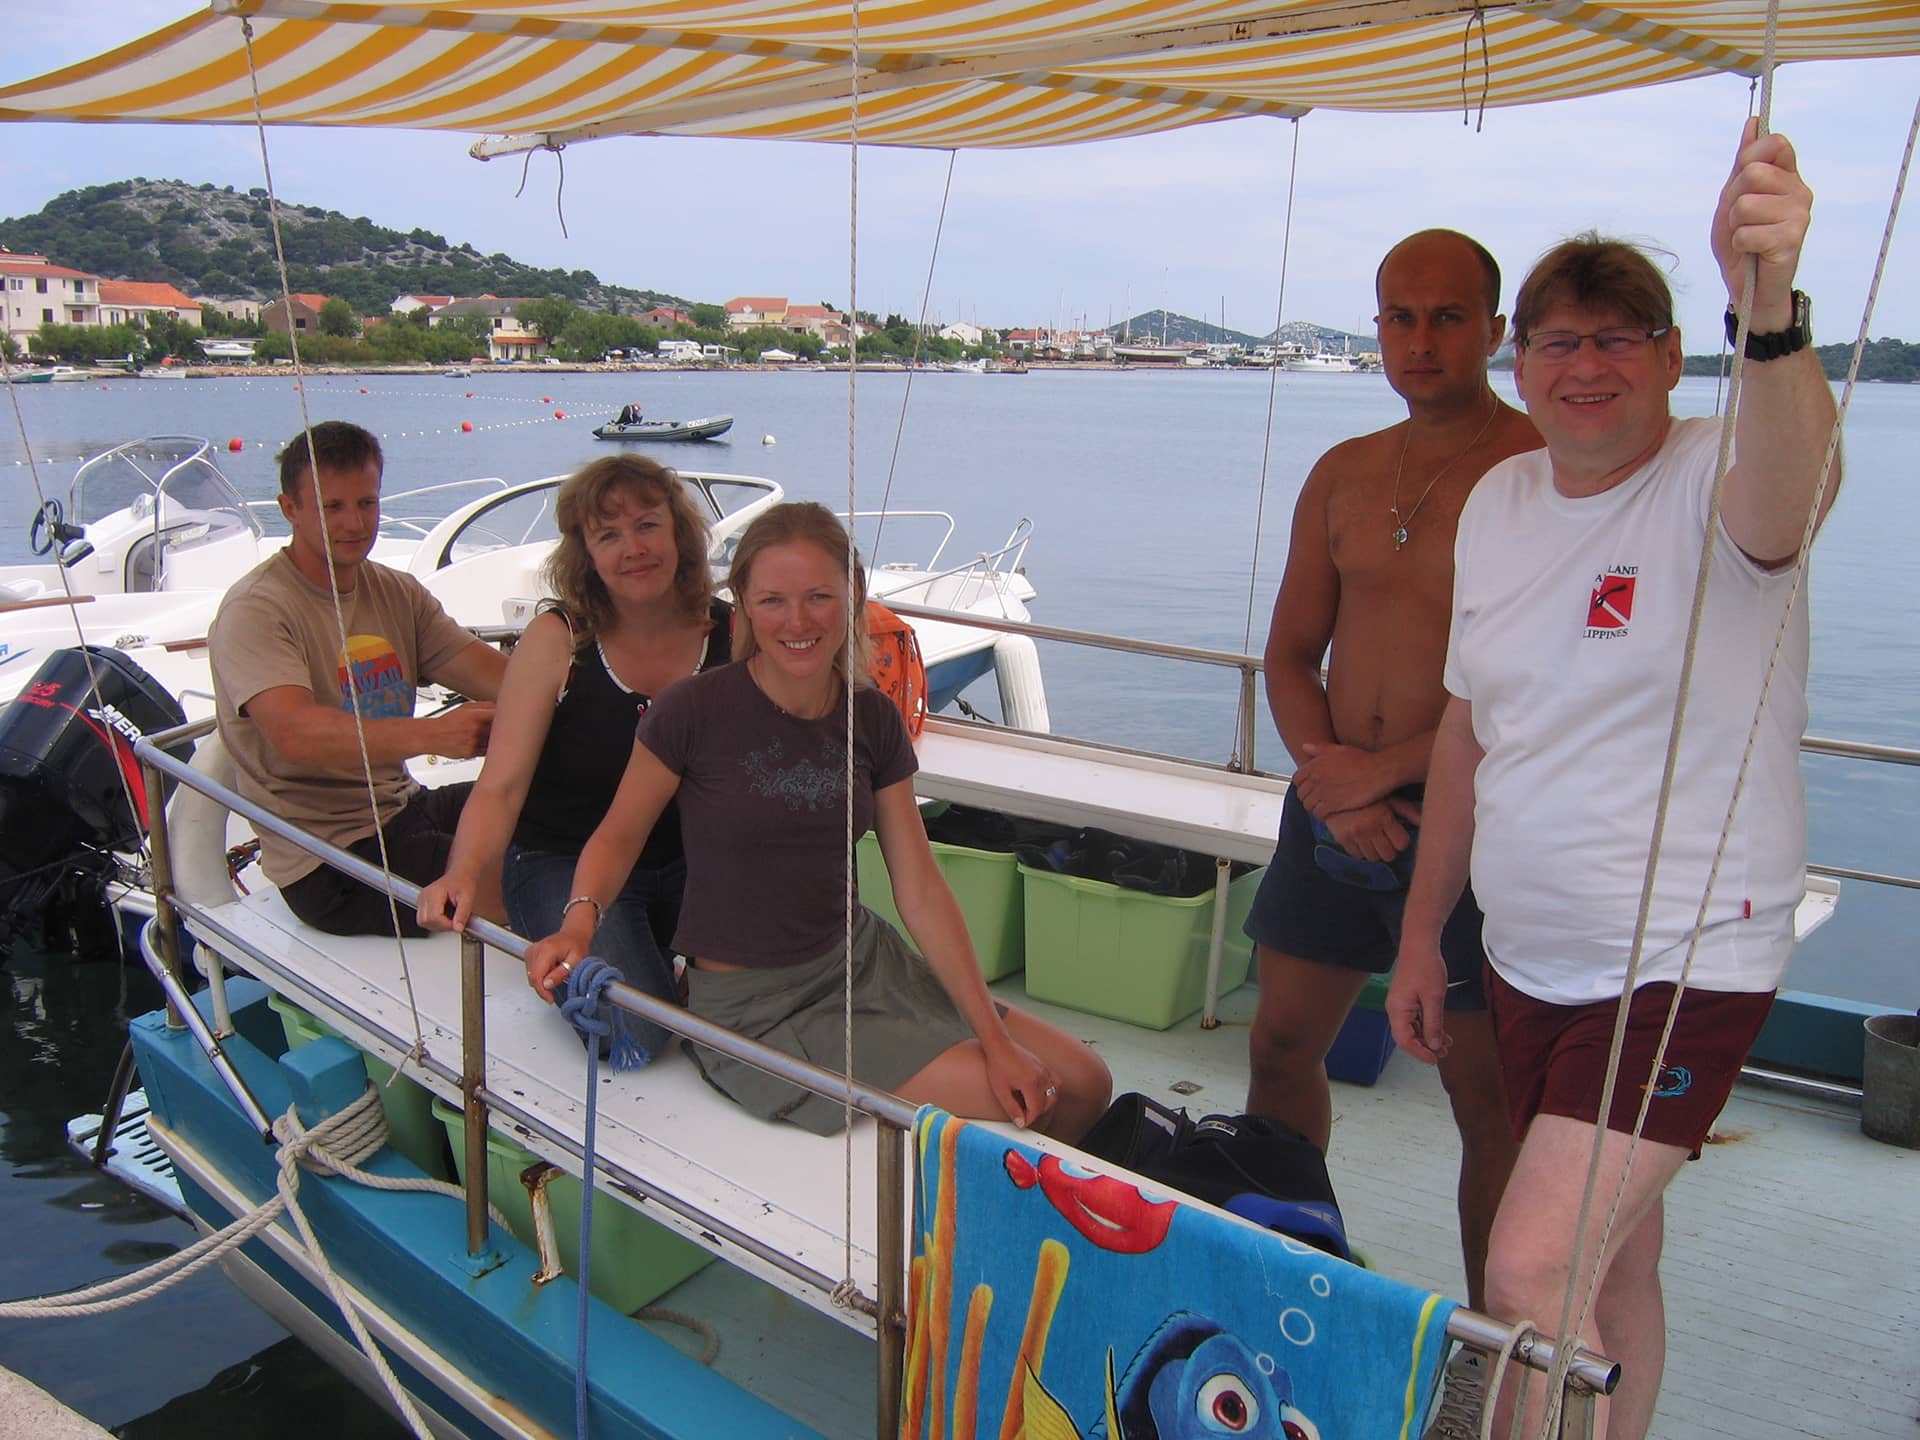 Ronac excursion and diving boat in murter